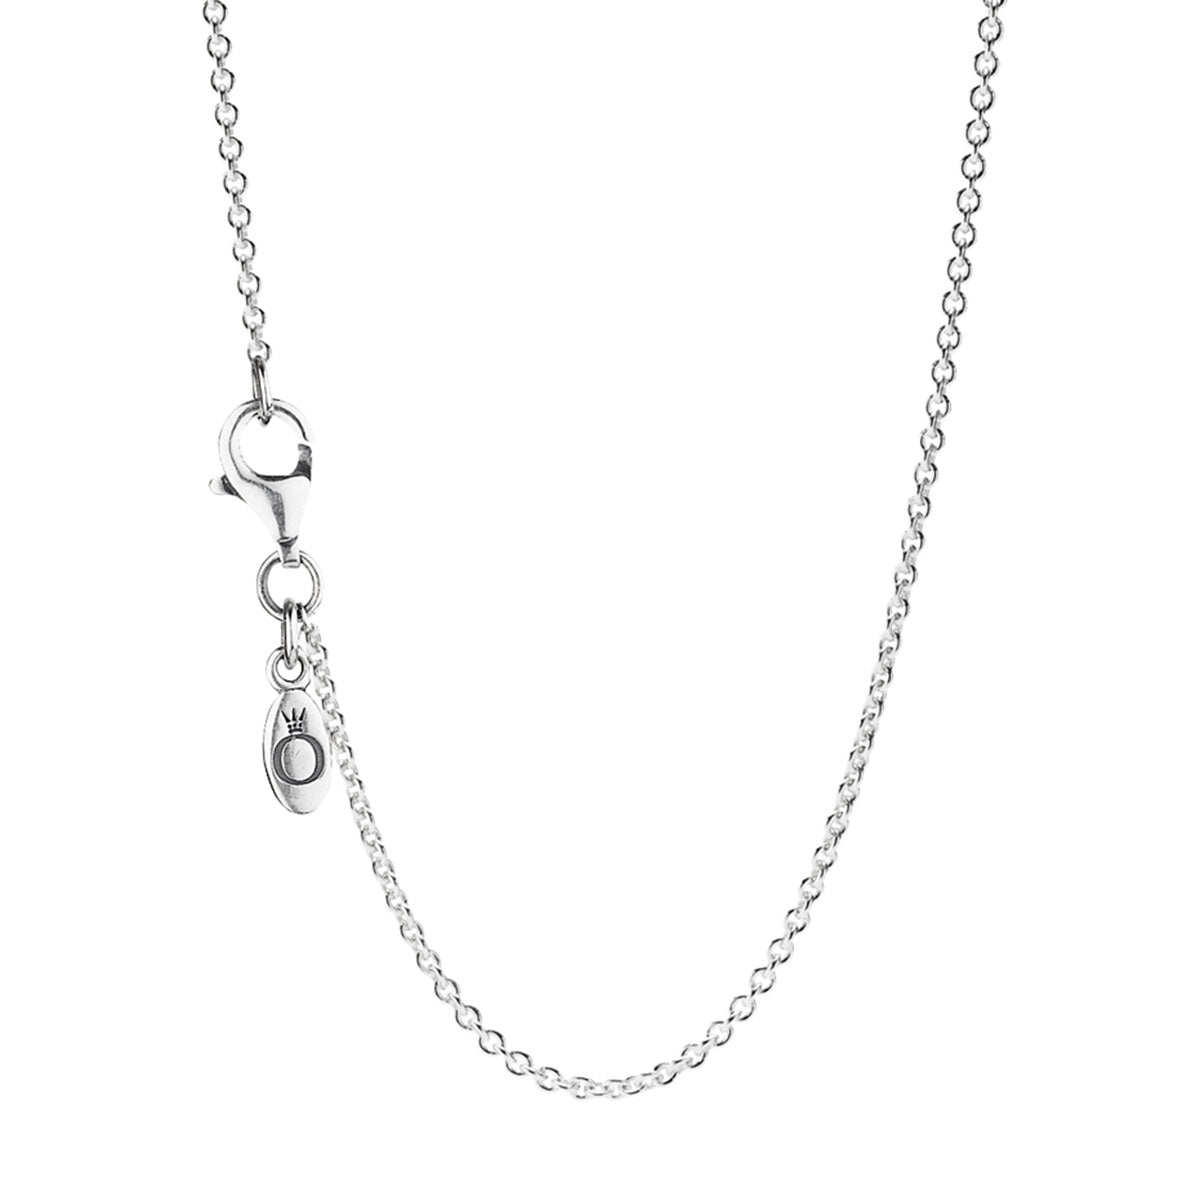 Pandora Sterling Silver Chain with clasp – Pancharmbracelets